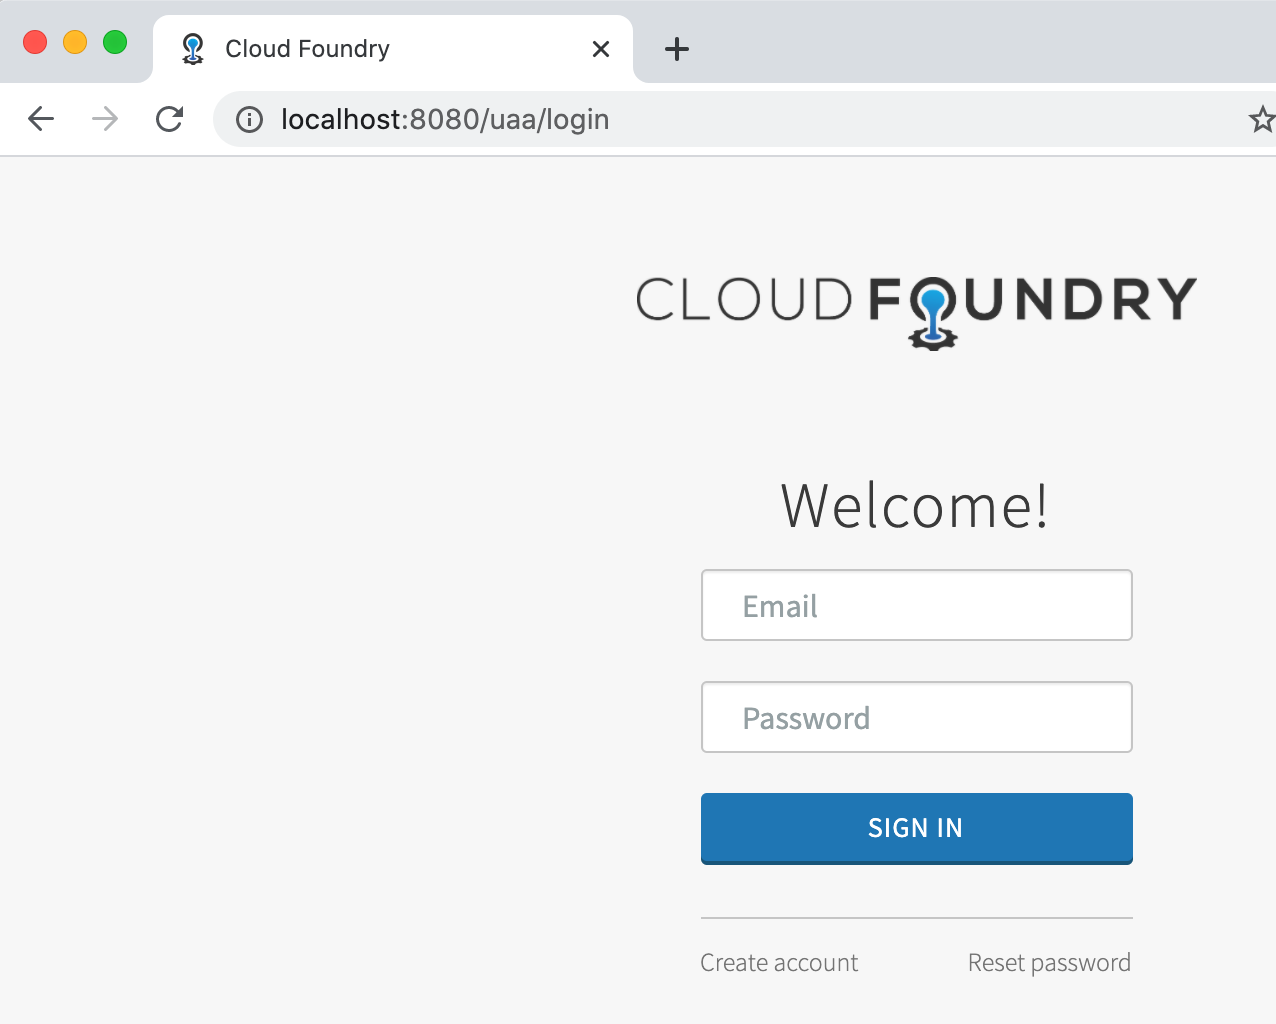 Spring Cloud Data Flow integrates Cloudfoundry UAA services for